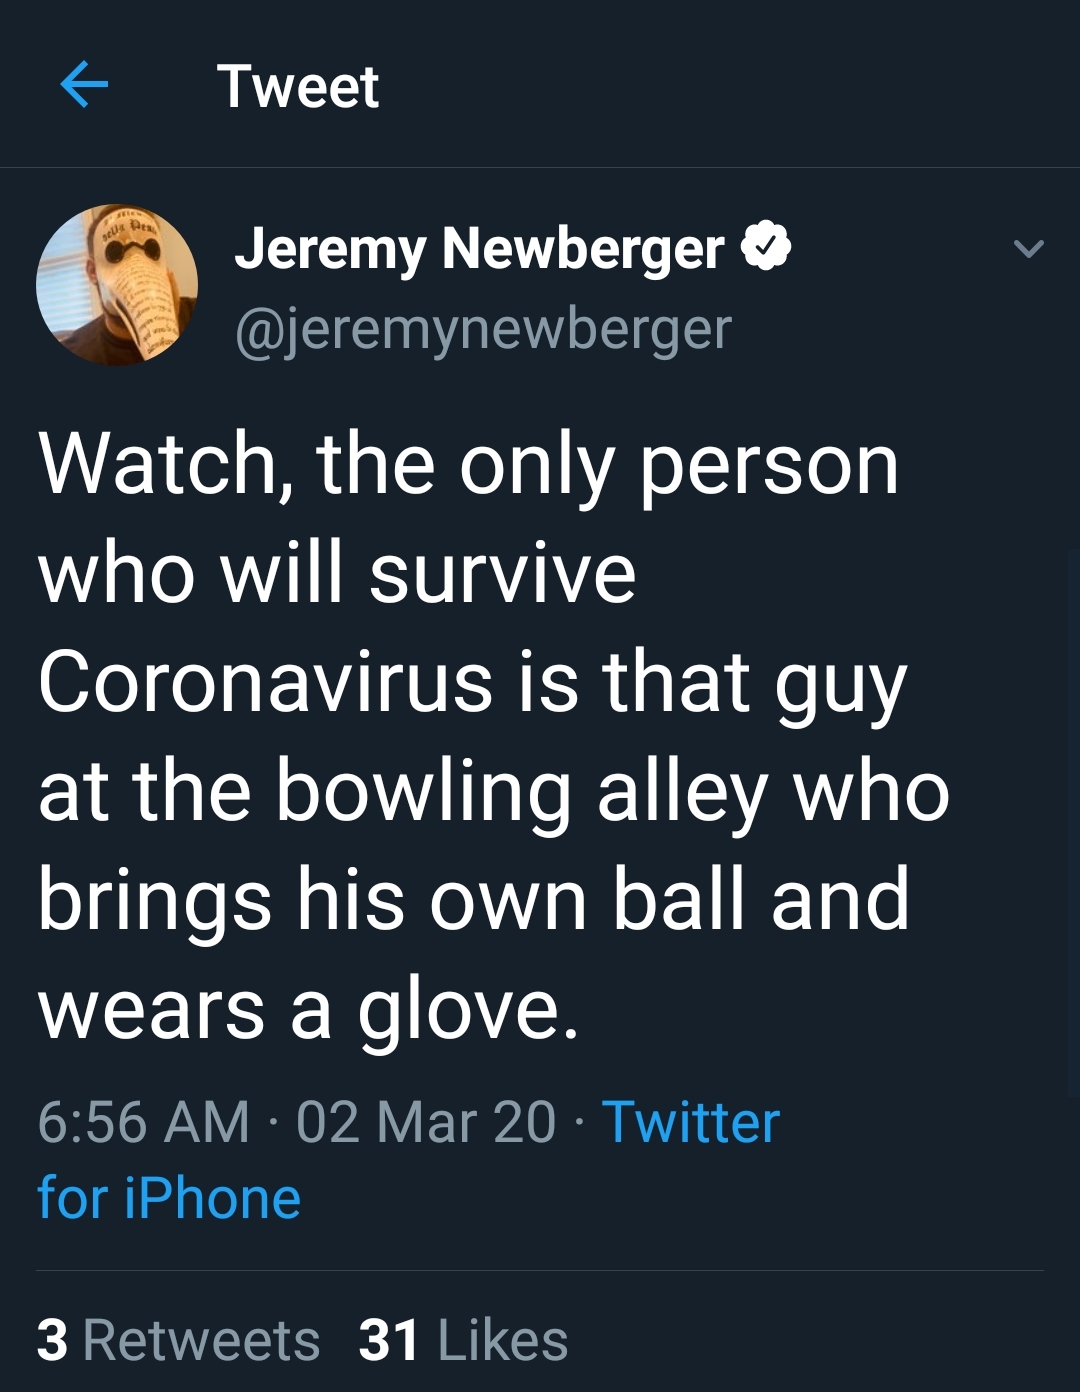 screenshot - Tweet Jeremy Newberger Watch, the only person who will survive Coronavirus is that guy at the bowling alley who brings his own ball and wears a glove. 02 Mar 20 Twitter for iPhone 3 31